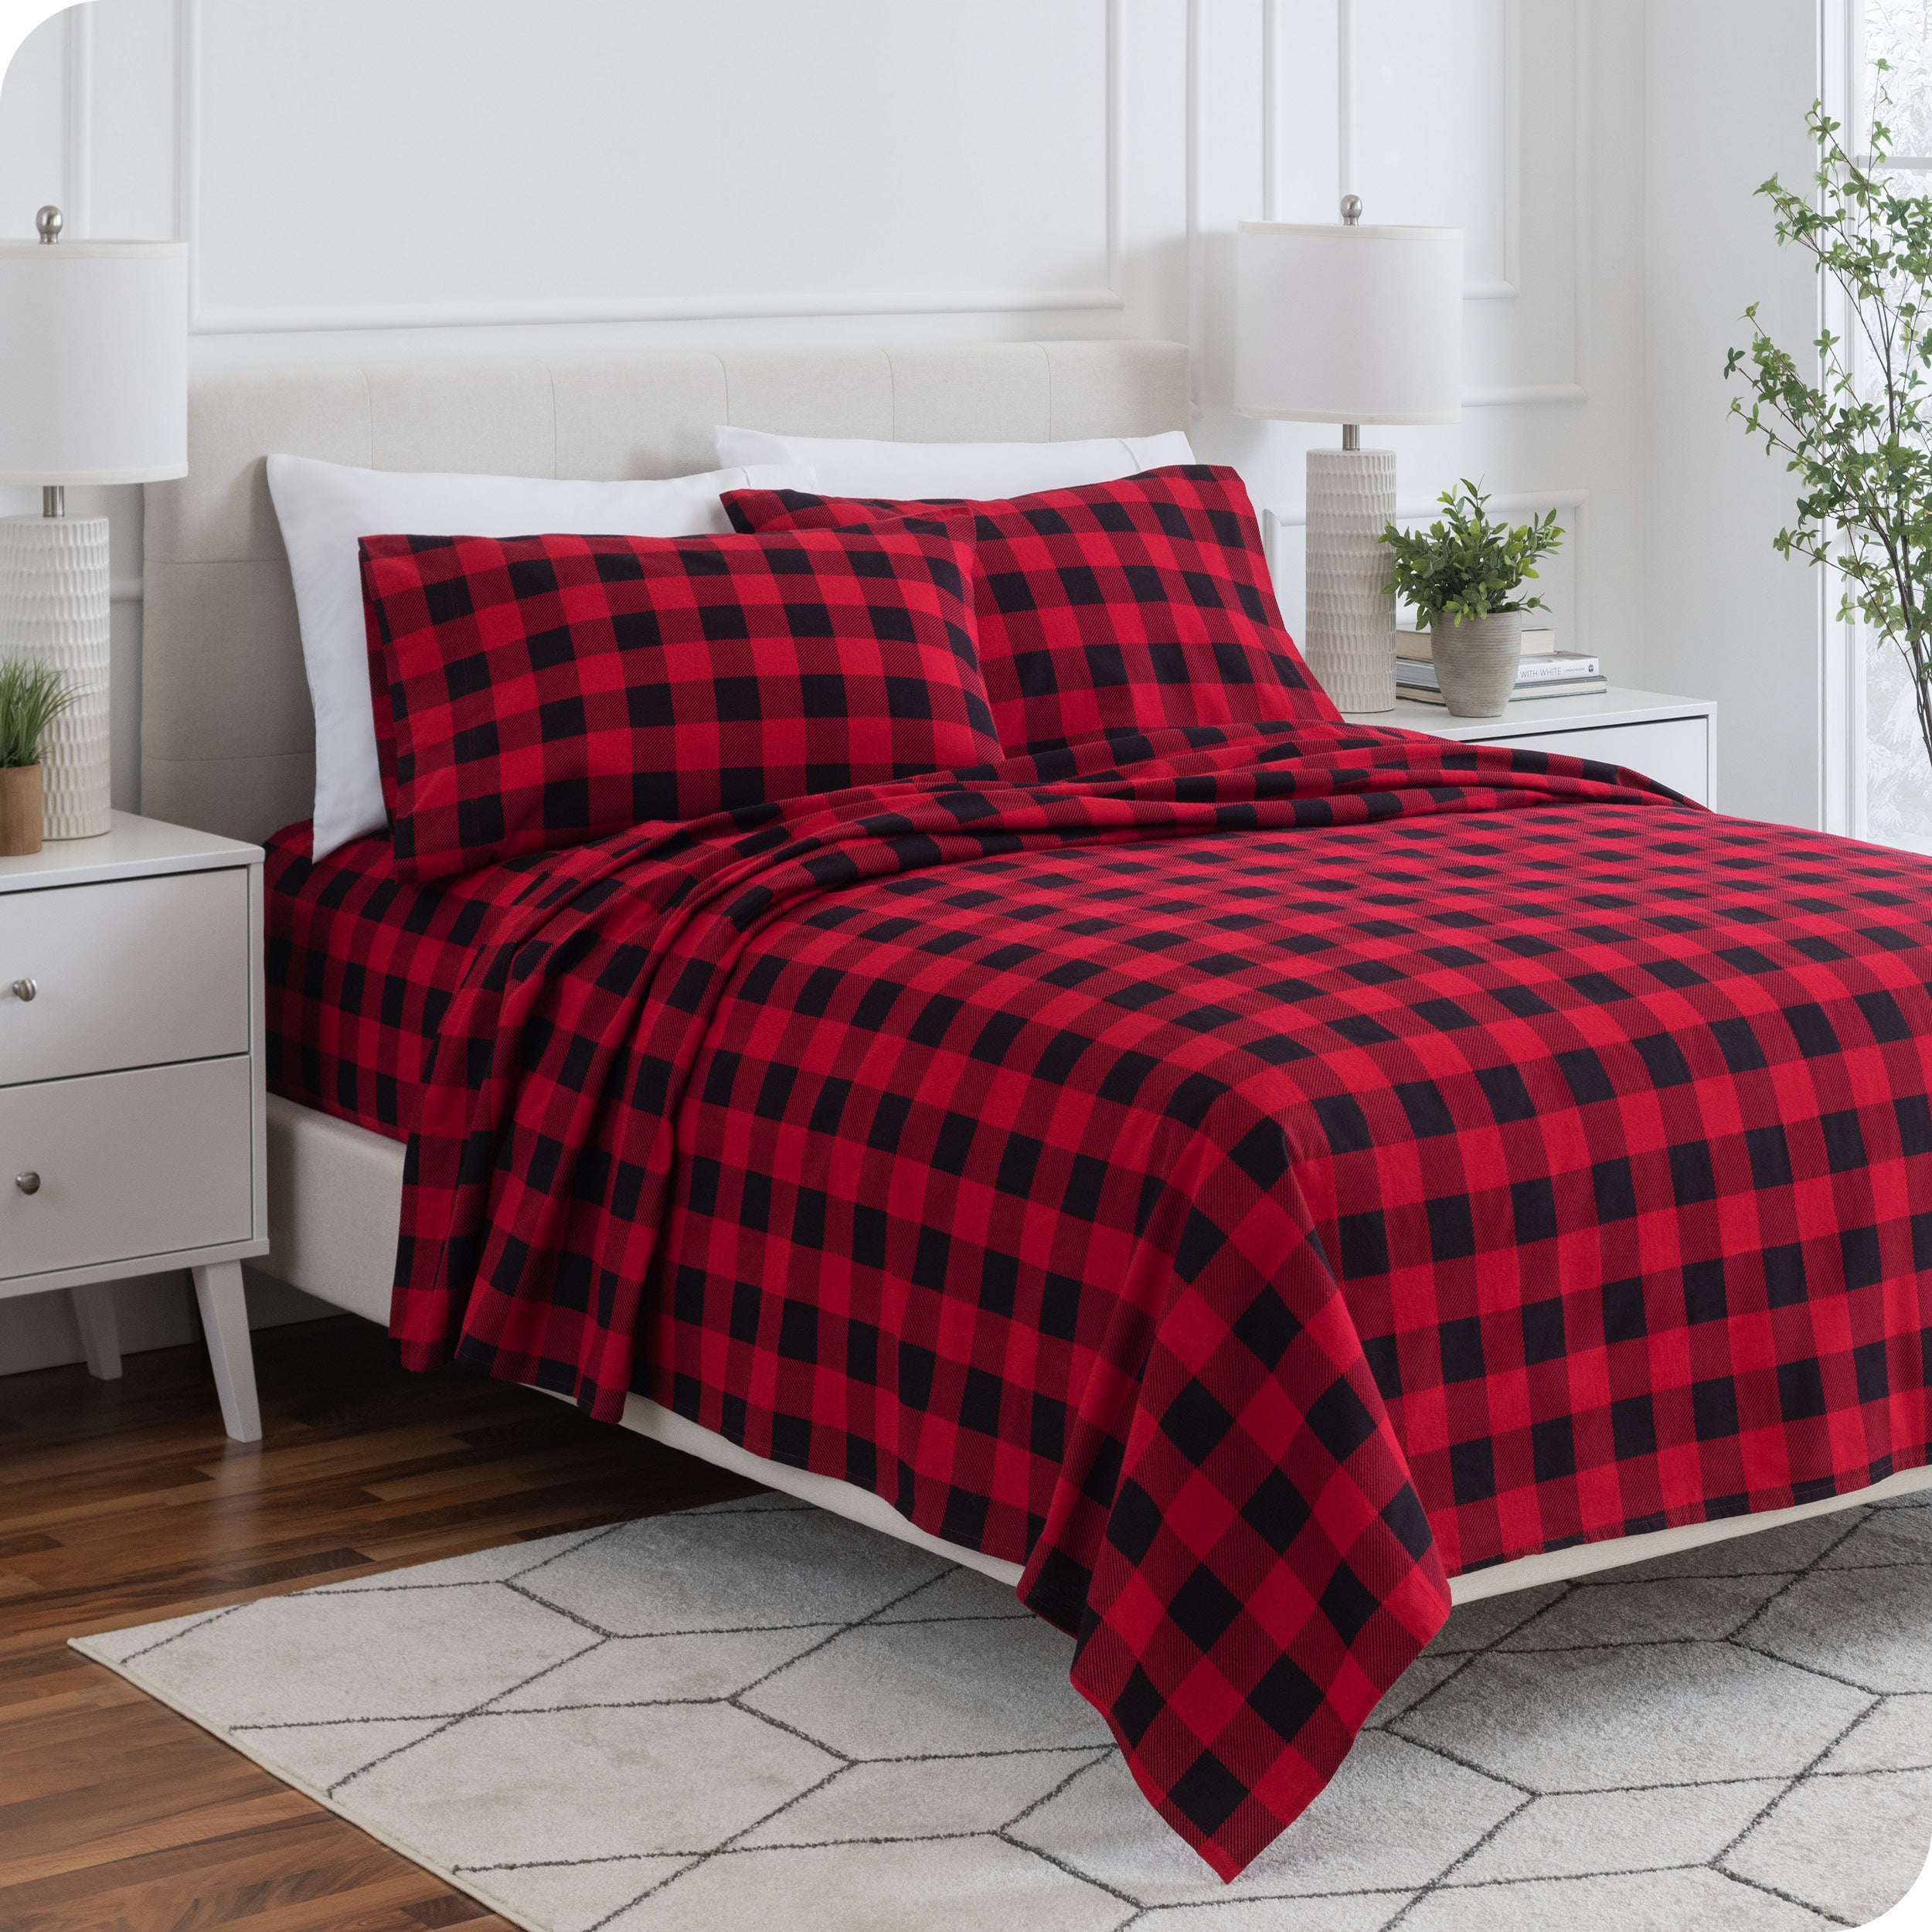 Flannel print sheets neatly spread across a bed